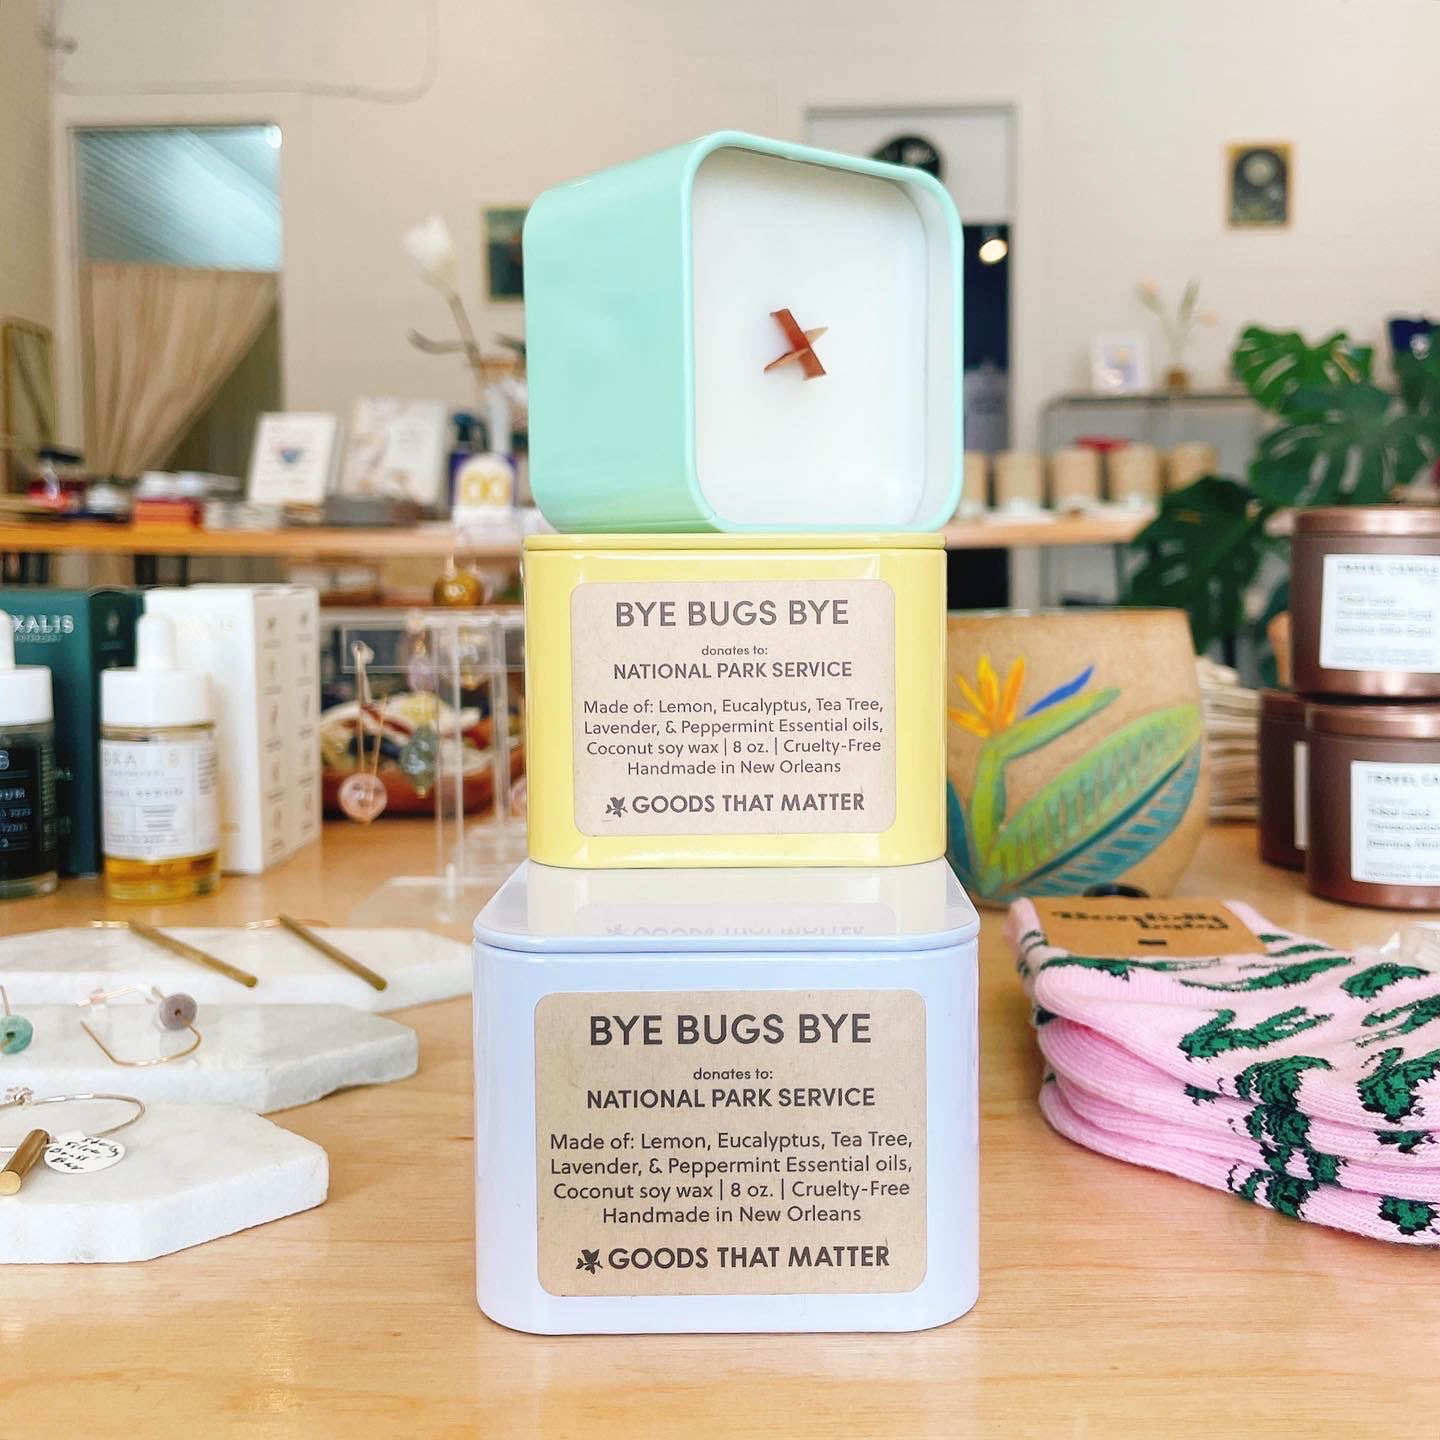 Bye Bugs Bye - Citronella (ish) Outdoor Candle, Gives to National Park Service